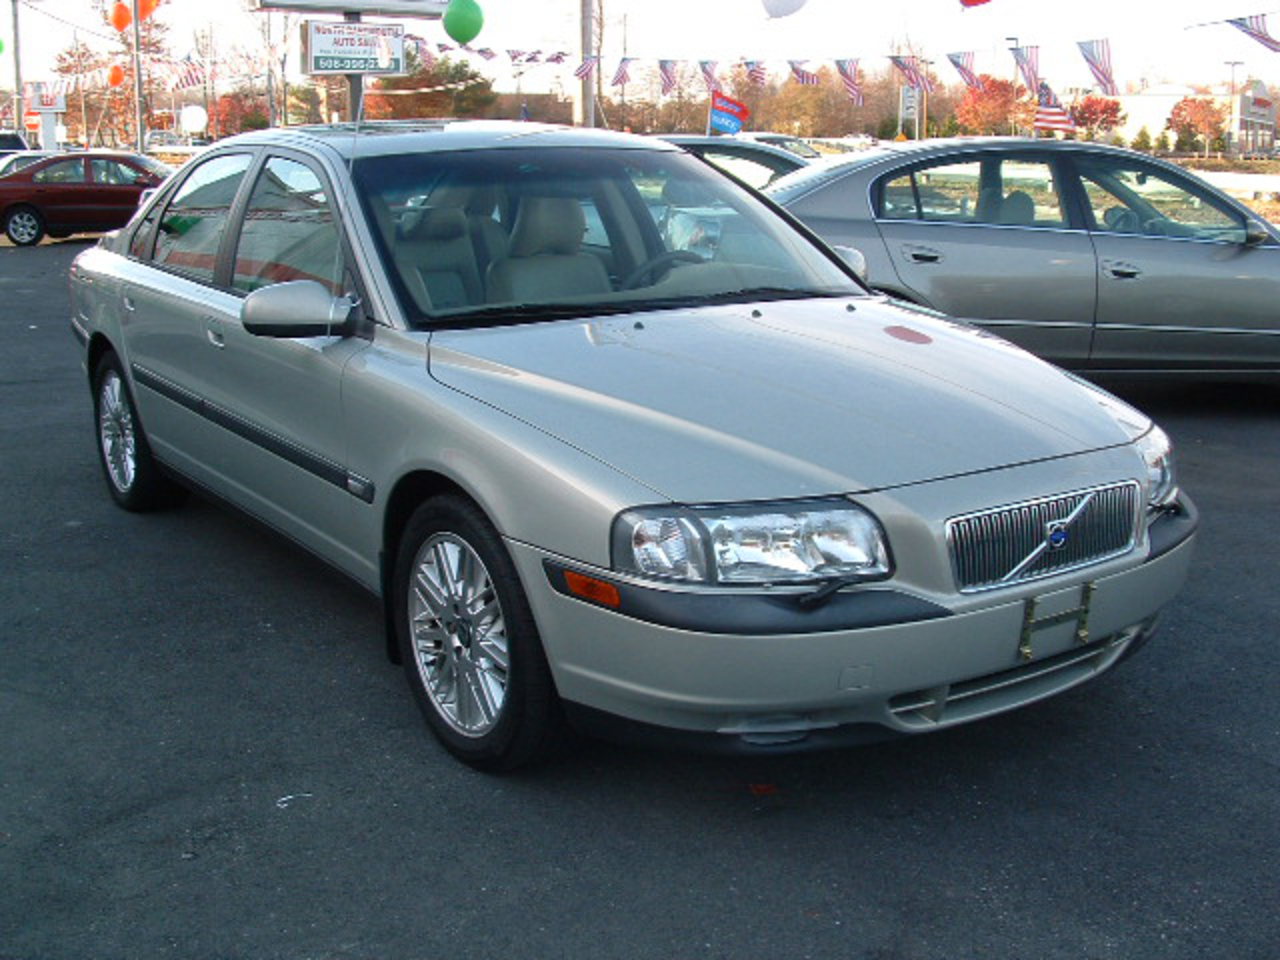 2001 Volvo S80 Makes a Worthy Choice as Used Car